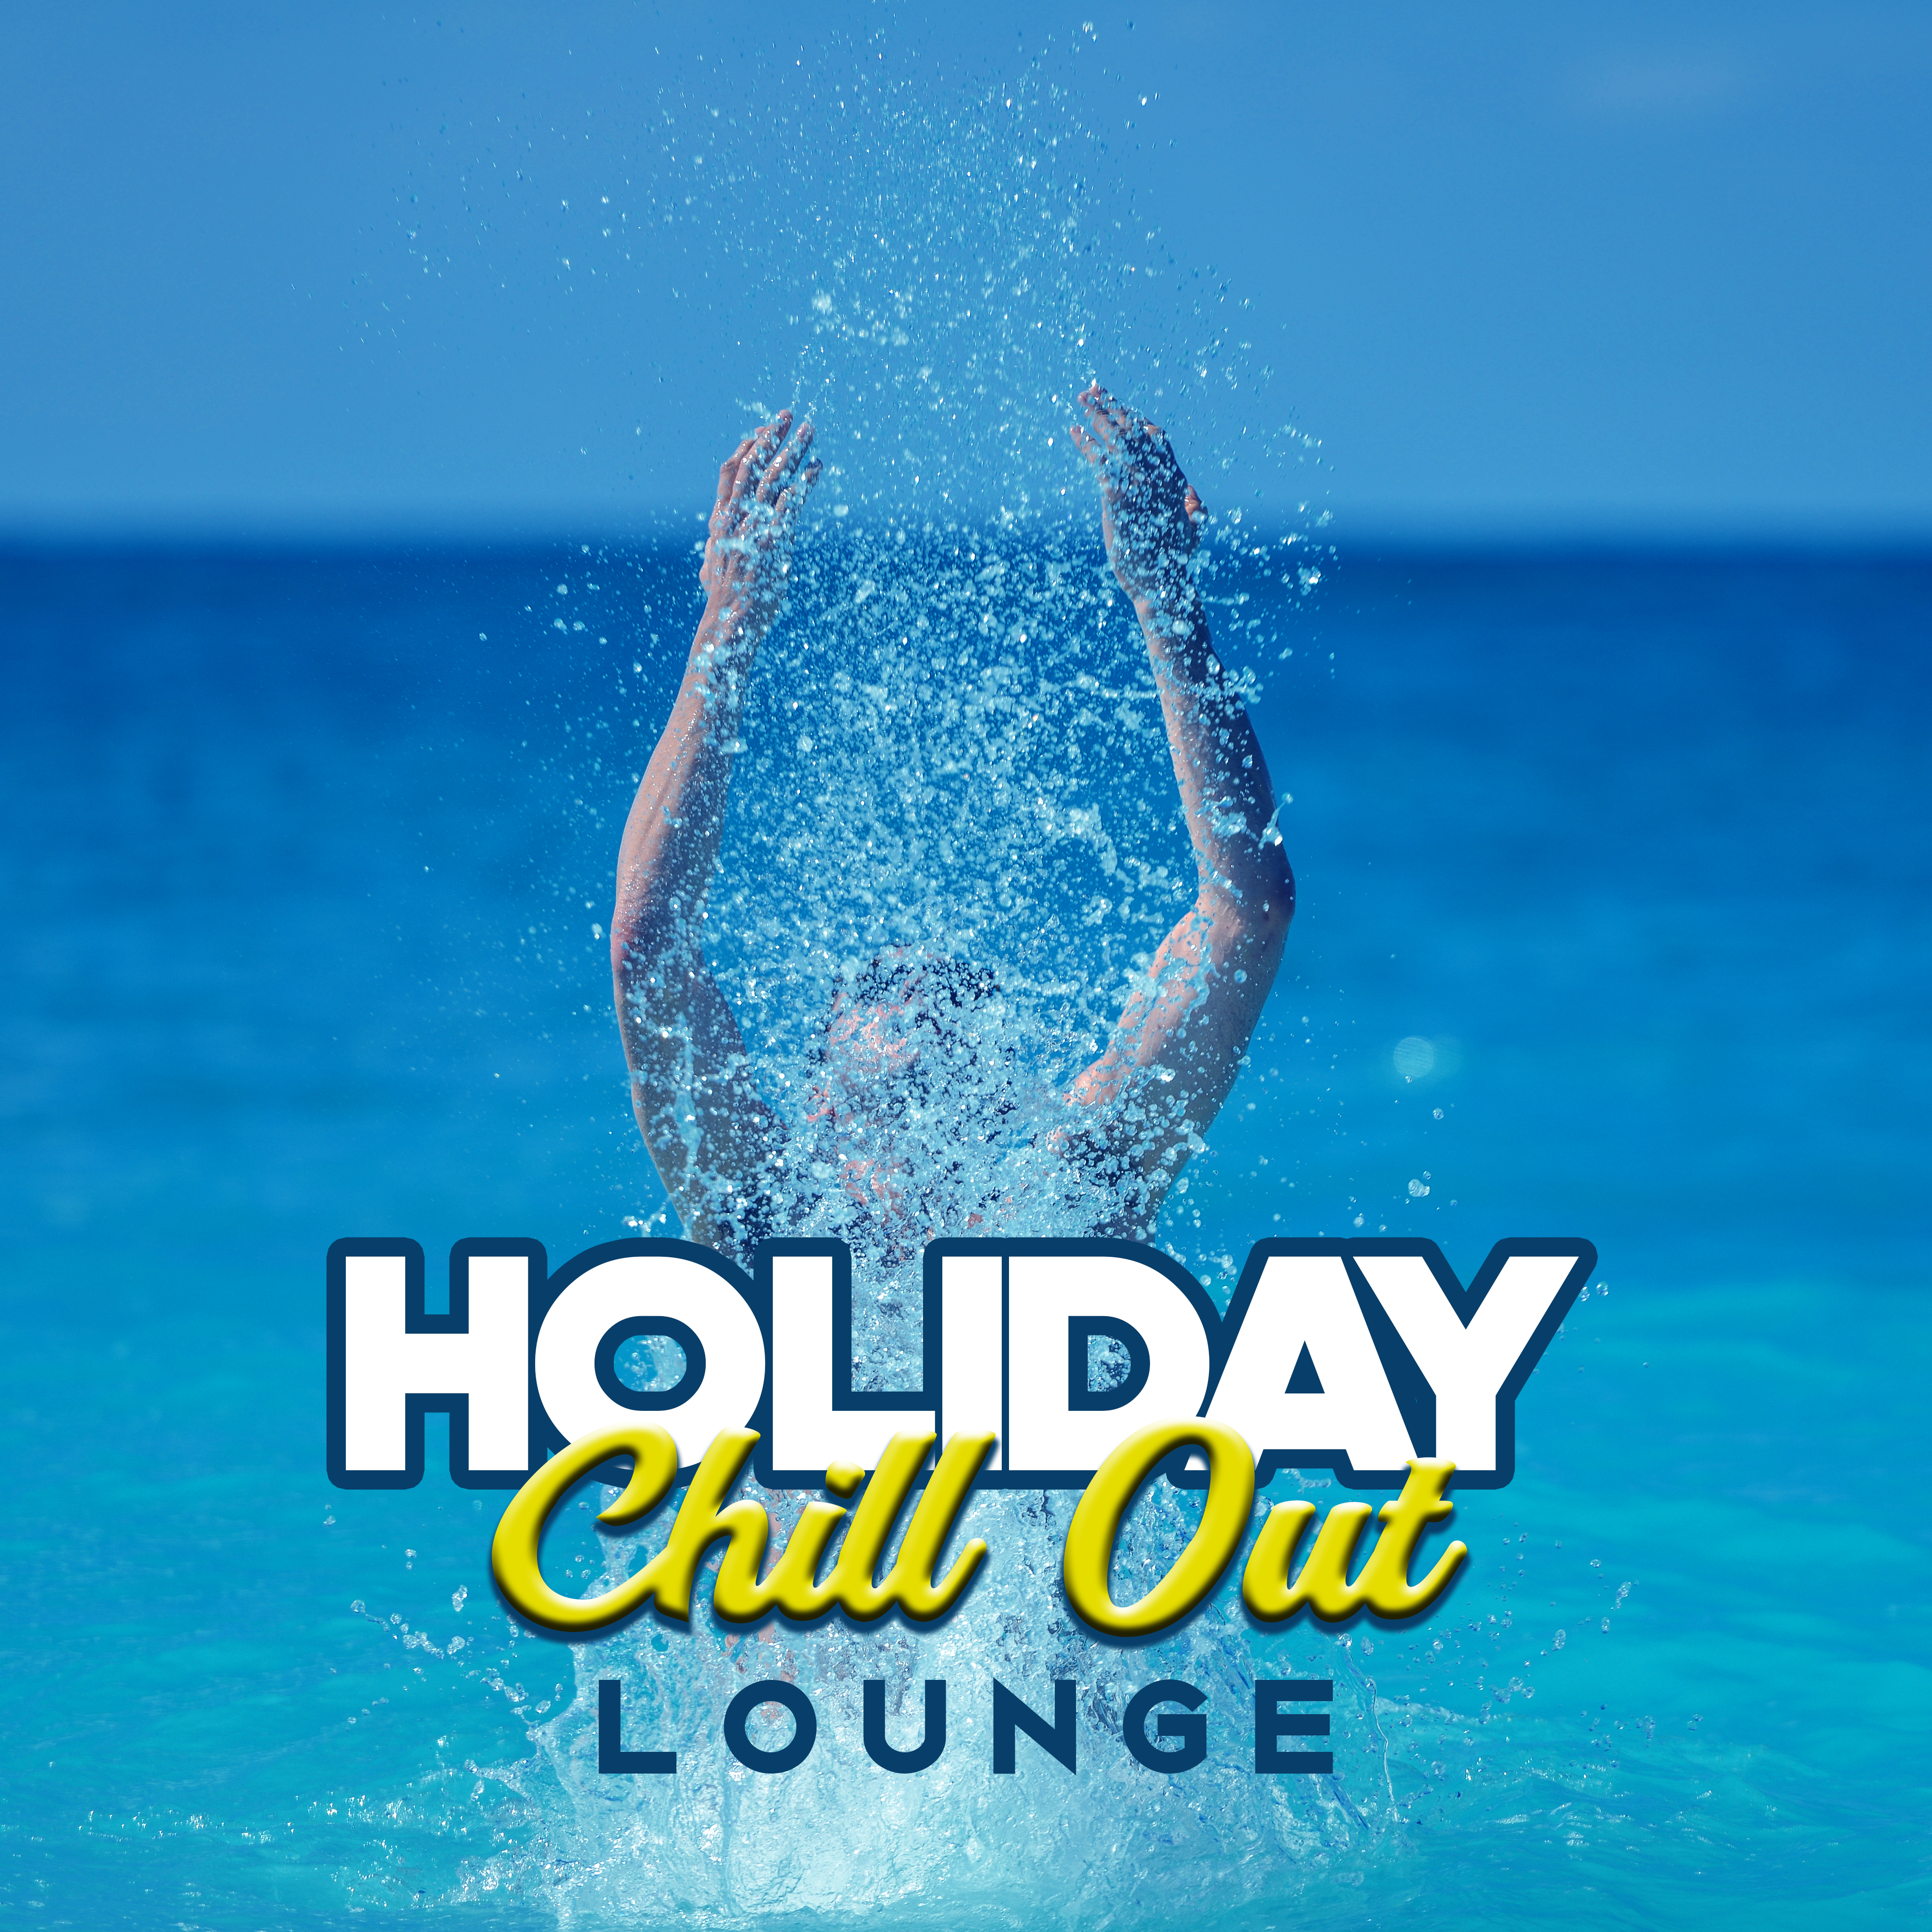 Holiday Chill Out Lounge – Summer Vibes, Chilled Sounds, Holiday Relaxation, Beach Music